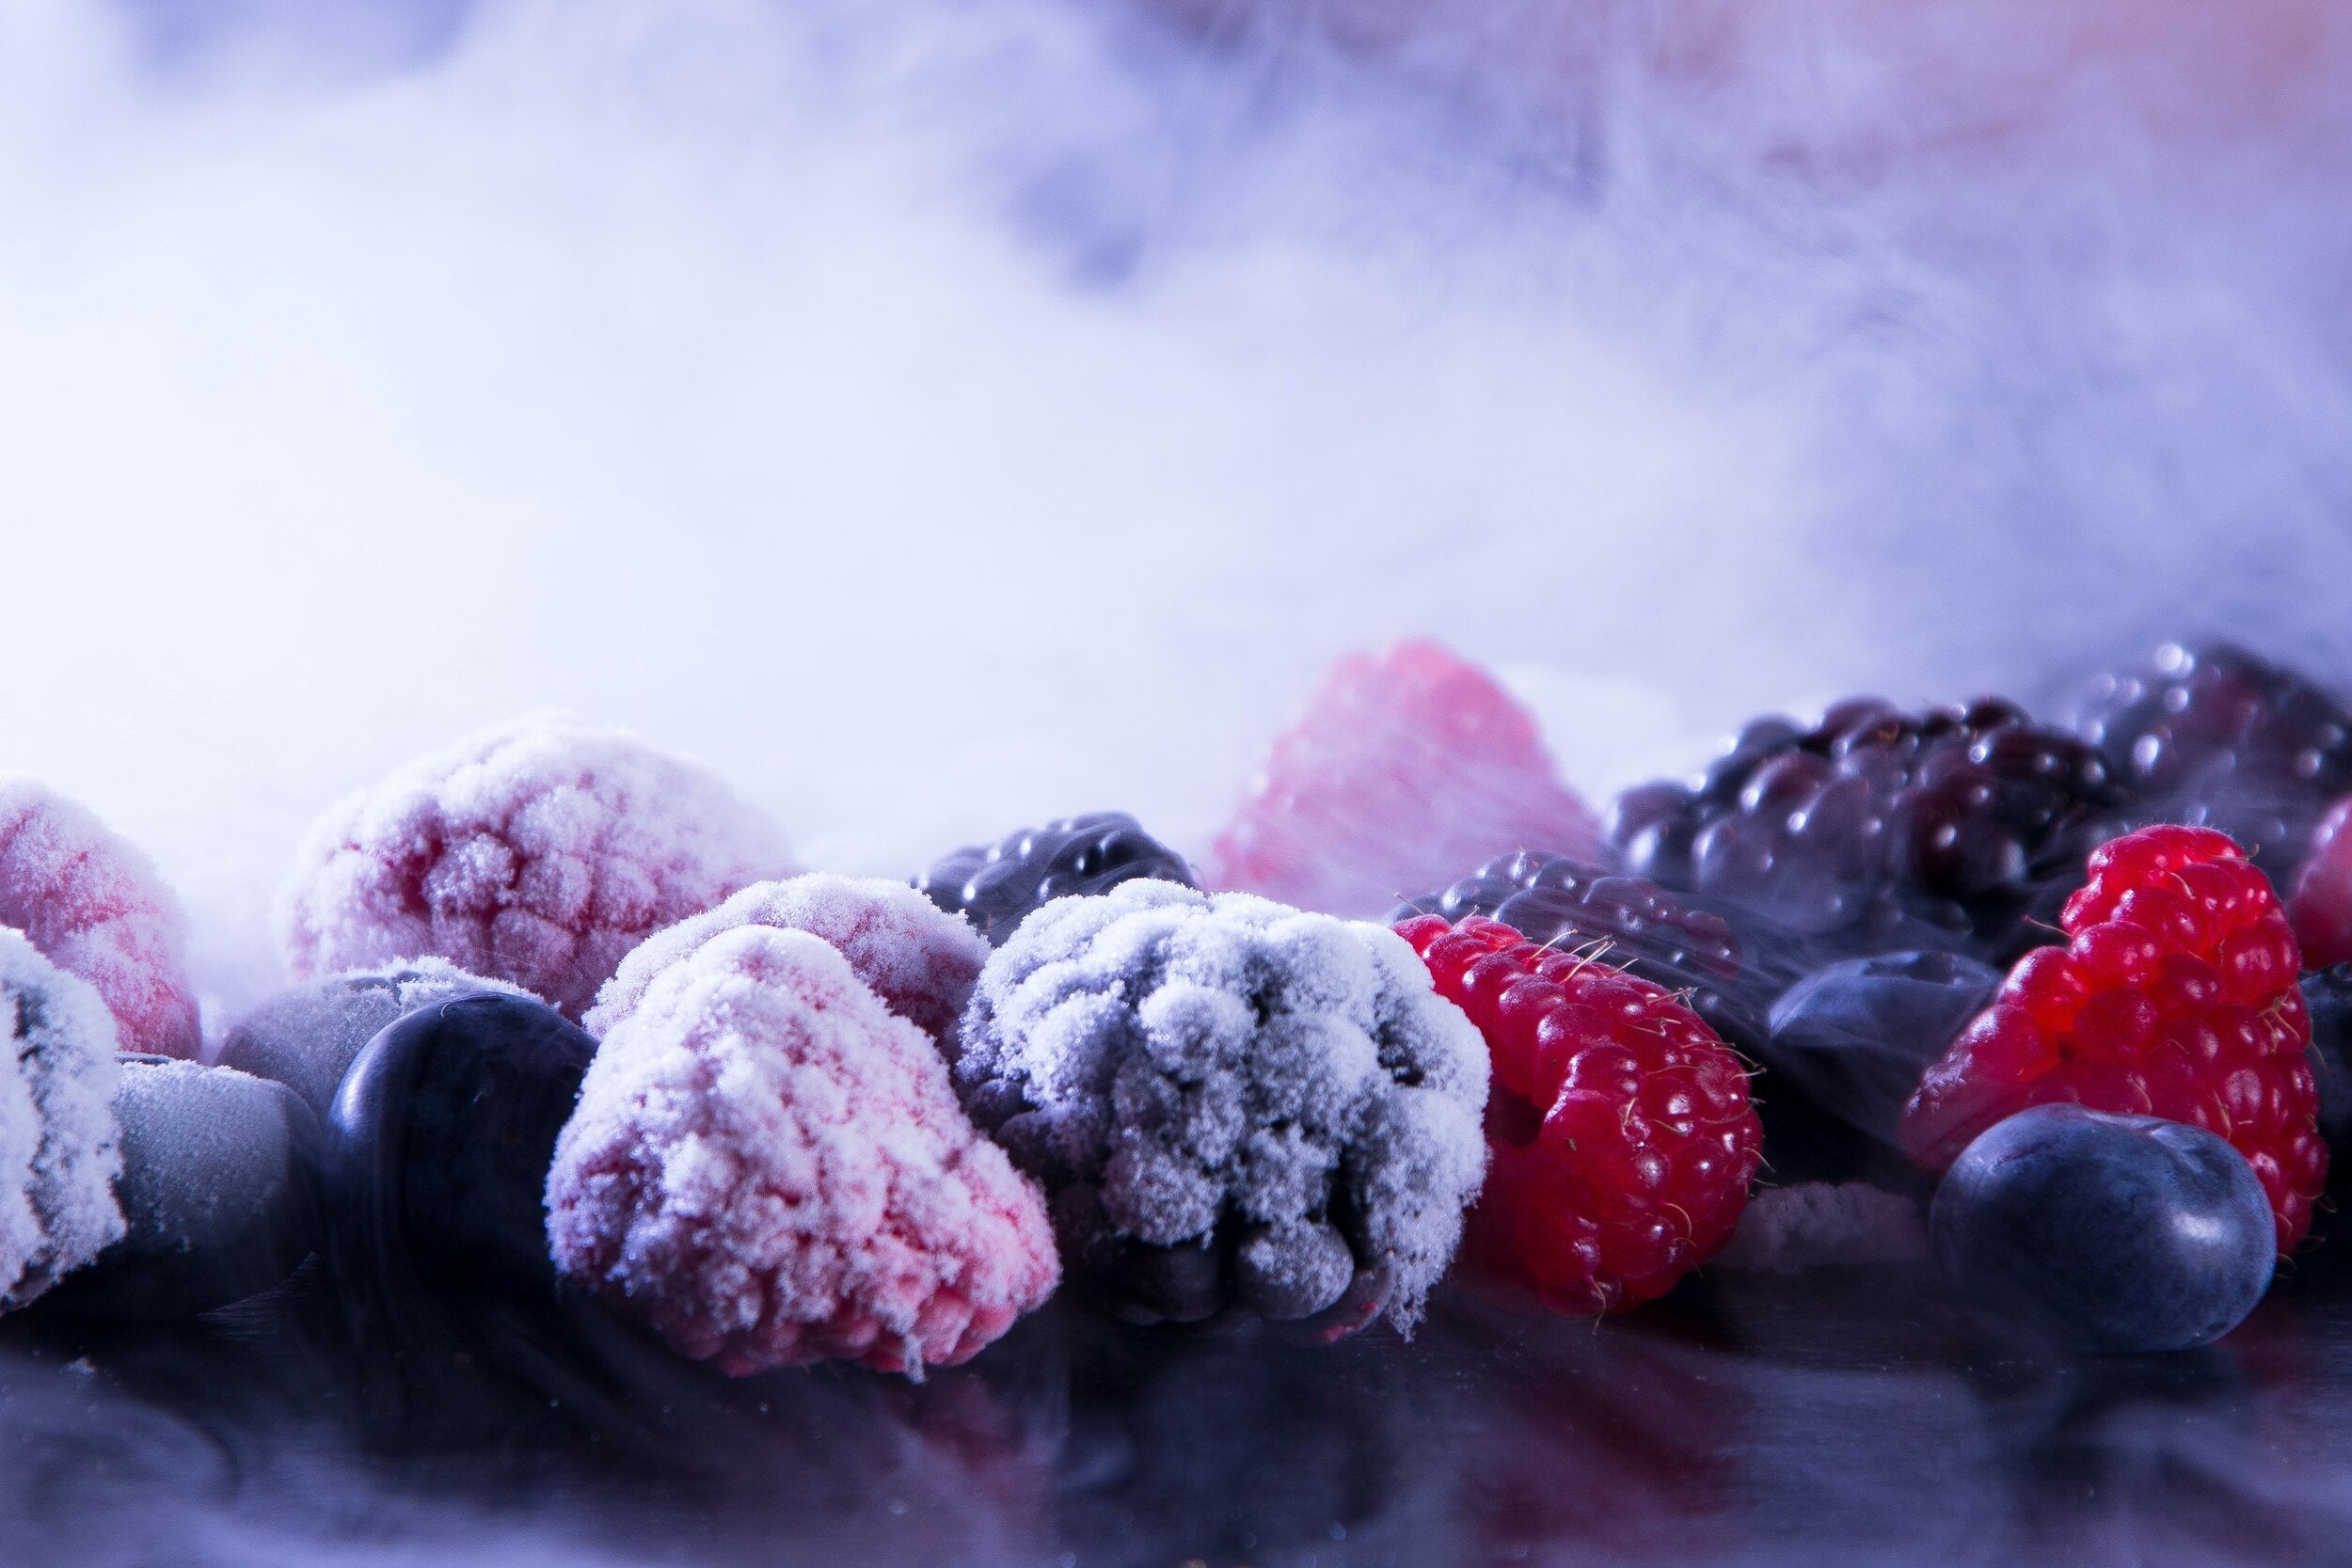 WORKING PRINCIPLE & ADVANTAGES OF FREEZE-DRYING FOOD